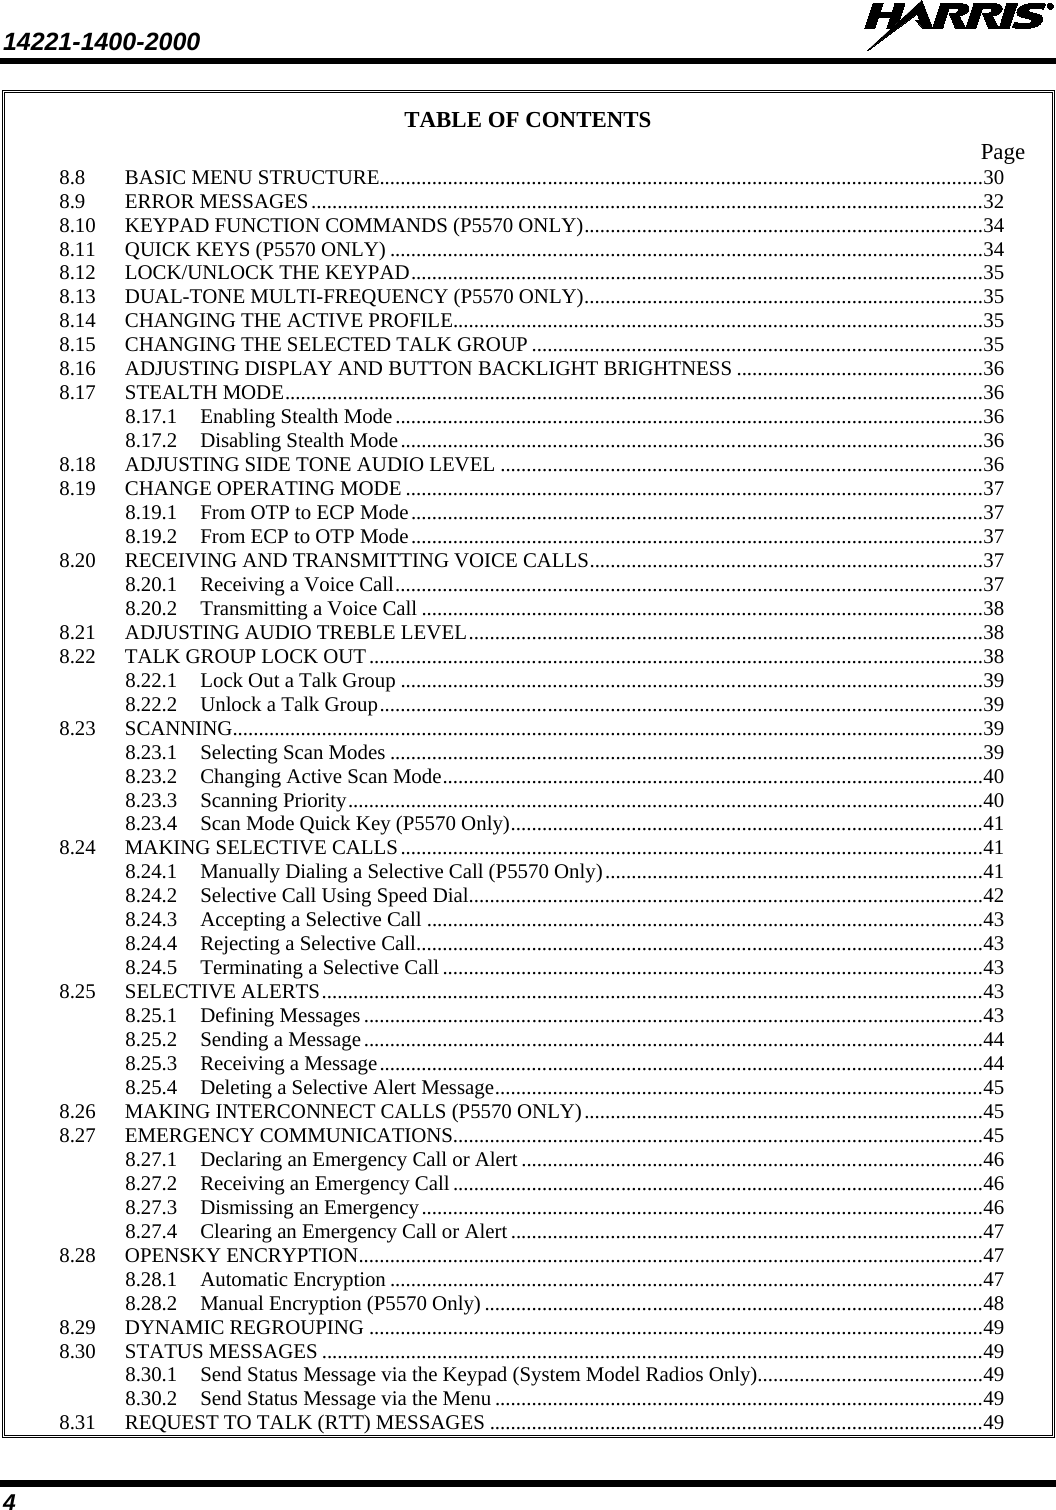 14221-1400-2000    4 TABLE OF CONTENTS Page 8.8 BASIC MENU STRUCTURE................................................................................................................... 30 8.9 ERROR MESSAGES ................................................................................................................................ 32 8.10 KEYPAD FUNCTION COMMANDS (P5570 ONLY) ............................................................................ 34 8.11 QUICK KEYS (P5570 ONLY) ................................................................................................................. 34 8.12 LOCK/UNLOCK THE KEYPAD ............................................................................................................. 35 8.13 DUAL-TONE MULTI-FREQUENCY (P5570 ONLY) ............................................................................ 35 8.14 CHANGING THE ACTIVE PROFILE ..................................................................................................... 35 8.15 CHANGING THE SELECTED TALK GROUP ...................................................................................... 35 8.16 ADJUSTING DISPLAY AND BUTTON BACKLIGHT BRIGHTNESS ............................................... 36 8.17 STEALTH MODE ..................................................................................................................................... 36 8.17.1 Enabling Stealth Mode ................................................................................................................ 36 8.17.2 Disabling Stealth Mode ............................................................................................................... 36 8.18 ADJUSTING SIDE TONE AUDIO LEVEL ............................................................................................ 36 8.19 CHANGE OPERATING MODE .............................................................................................................. 37 8.19.1 From OTP to ECP Mode ............................................................................................................. 37 8.19.2 From ECP to OTP Mode ............................................................................................................. 37 8.20 RECEIVING AND TRANSMITTING VOICE CALLS ........................................................................... 37 8.20.1 Receiving a Voice Call ................................................................................................................ 37 8.20.2 Transmitting a Voice Call ........................................................................................................... 38 8.21 ADJUSTING AUDIO TREBLE LEVEL .................................................................................................. 38 8.22 TALK GROUP LOCK OUT ..................................................................................................................... 38 8.22.1 Lock Out a Talk Group ............................................................................................................... 39 8.22.2 Unlock a Talk Group ................................................................................................................... 39 8.23 SCANNING............................................................................................................................................... 39 8.23.1 Selecting Scan Modes ................................................................................................................. 39 8.23.2 Changing Active Scan Mode ....................................................................................................... 40 8.23.3 Scanning Priority ......................................................................................................................... 40 8.23.4 Scan Mode Quick Key (P5570 Only) .......................................................................................... 41 8.24 MAKING SELECTIVE CALLS ............................................................................................................... 41 8.24.1 Manually Dialing a Selective Call (P5570 Only) ........................................................................ 41 8.24.2 Selective Call Using Speed Dial.................................................................................................. 42 8.24.3 Accepting a Selective Call .......................................................................................................... 43 8.24.4 Rejecting a Selective Call ............................................................................................................ 43 8.24.5 Terminating a Selective Call ....................................................................................................... 43 8.25 SELECTIVE ALERTS .............................................................................................................................. 43 8.25.1 Defining Messages ...................................................................................................................... 43 8.25.2 Sending a Message ...................................................................................................................... 44 8.25.3 Receiving a Message ................................................................................................................... 44 8.25.4 Deleting a Selective Alert Message ............................................................................................. 45 8.26 MAKING INTERCONNECT CALLS (P5570 ONLY) ............................................................................ 45 8.27 EMERGENCY COMMUNICATIONS..................................................................................................... 45 8.27.1 Declaring an Emergency Call or Alert ........................................................................................ 46 8.27.2 Receiving an Emergency Call ..................................................................................................... 46 8.27.3 Dismissing an Emergency ........................................................................................................... 46 8.27.4 Clearing an Emergency Call or Alert .......................................................................................... 47 8.28 OPENSKY ENCRYPTION ....................................................................................................................... 47 8.28.1 Automatic Encryption ................................................................................................................. 47 8.28.2 Manual Encryption (P5570 Only) ............................................................................................... 48 8.29 DYNAMIC REGROUPING ..................................................................................................................... 49 8.30 STATUS MESSAGES .............................................................................................................................. 49 8.30.1 Send Status Message via the Keypad (System Model Radios Only)........................................... 49 8.30.2 Send Status Message via the Menu ............................................................................................. 49 8.31 REQUEST TO TALK (RTT) MESSAGES .............................................................................................. 49 